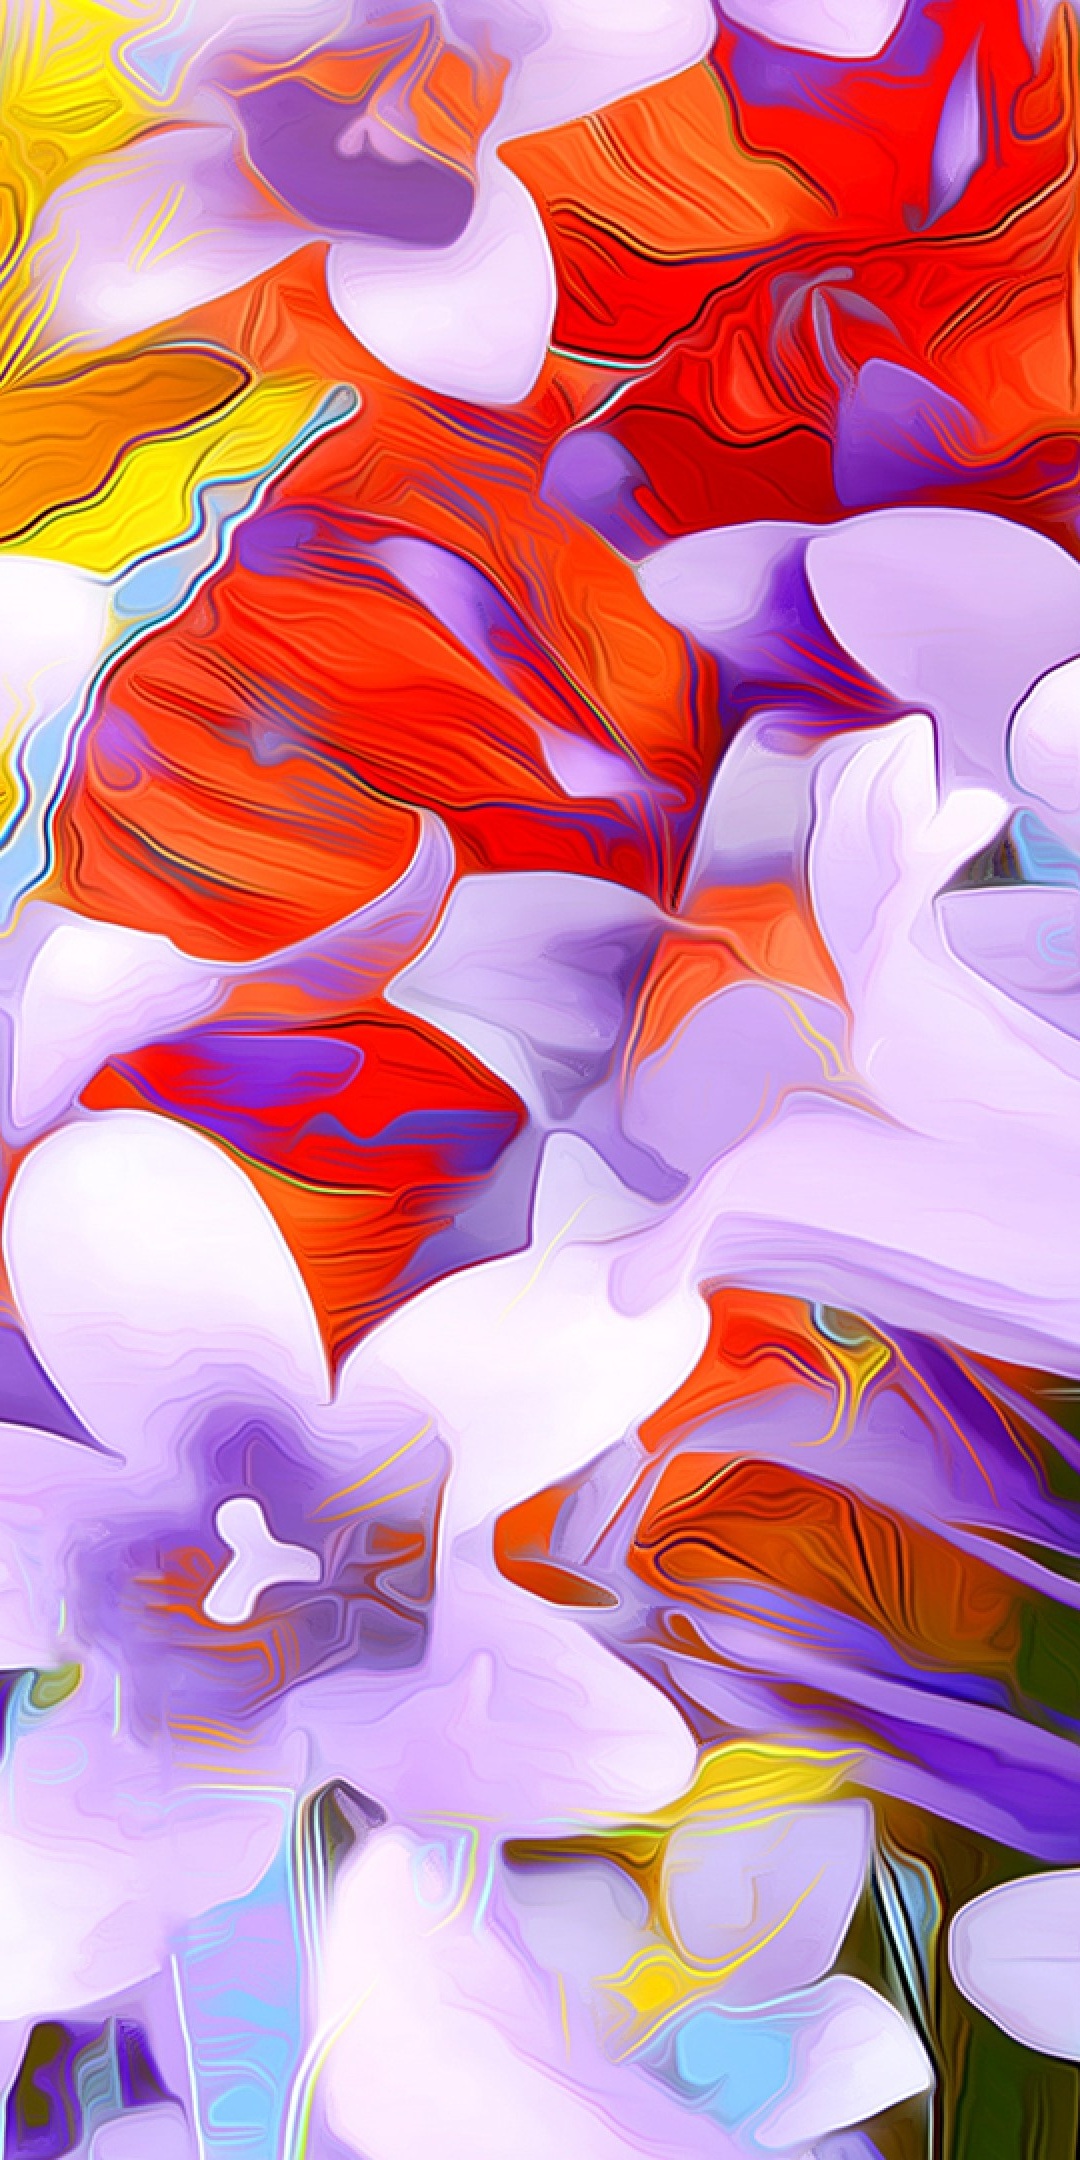 Flowers Art Abstraction (click to view) HD Wallpapers in 1080x2160 Resolution